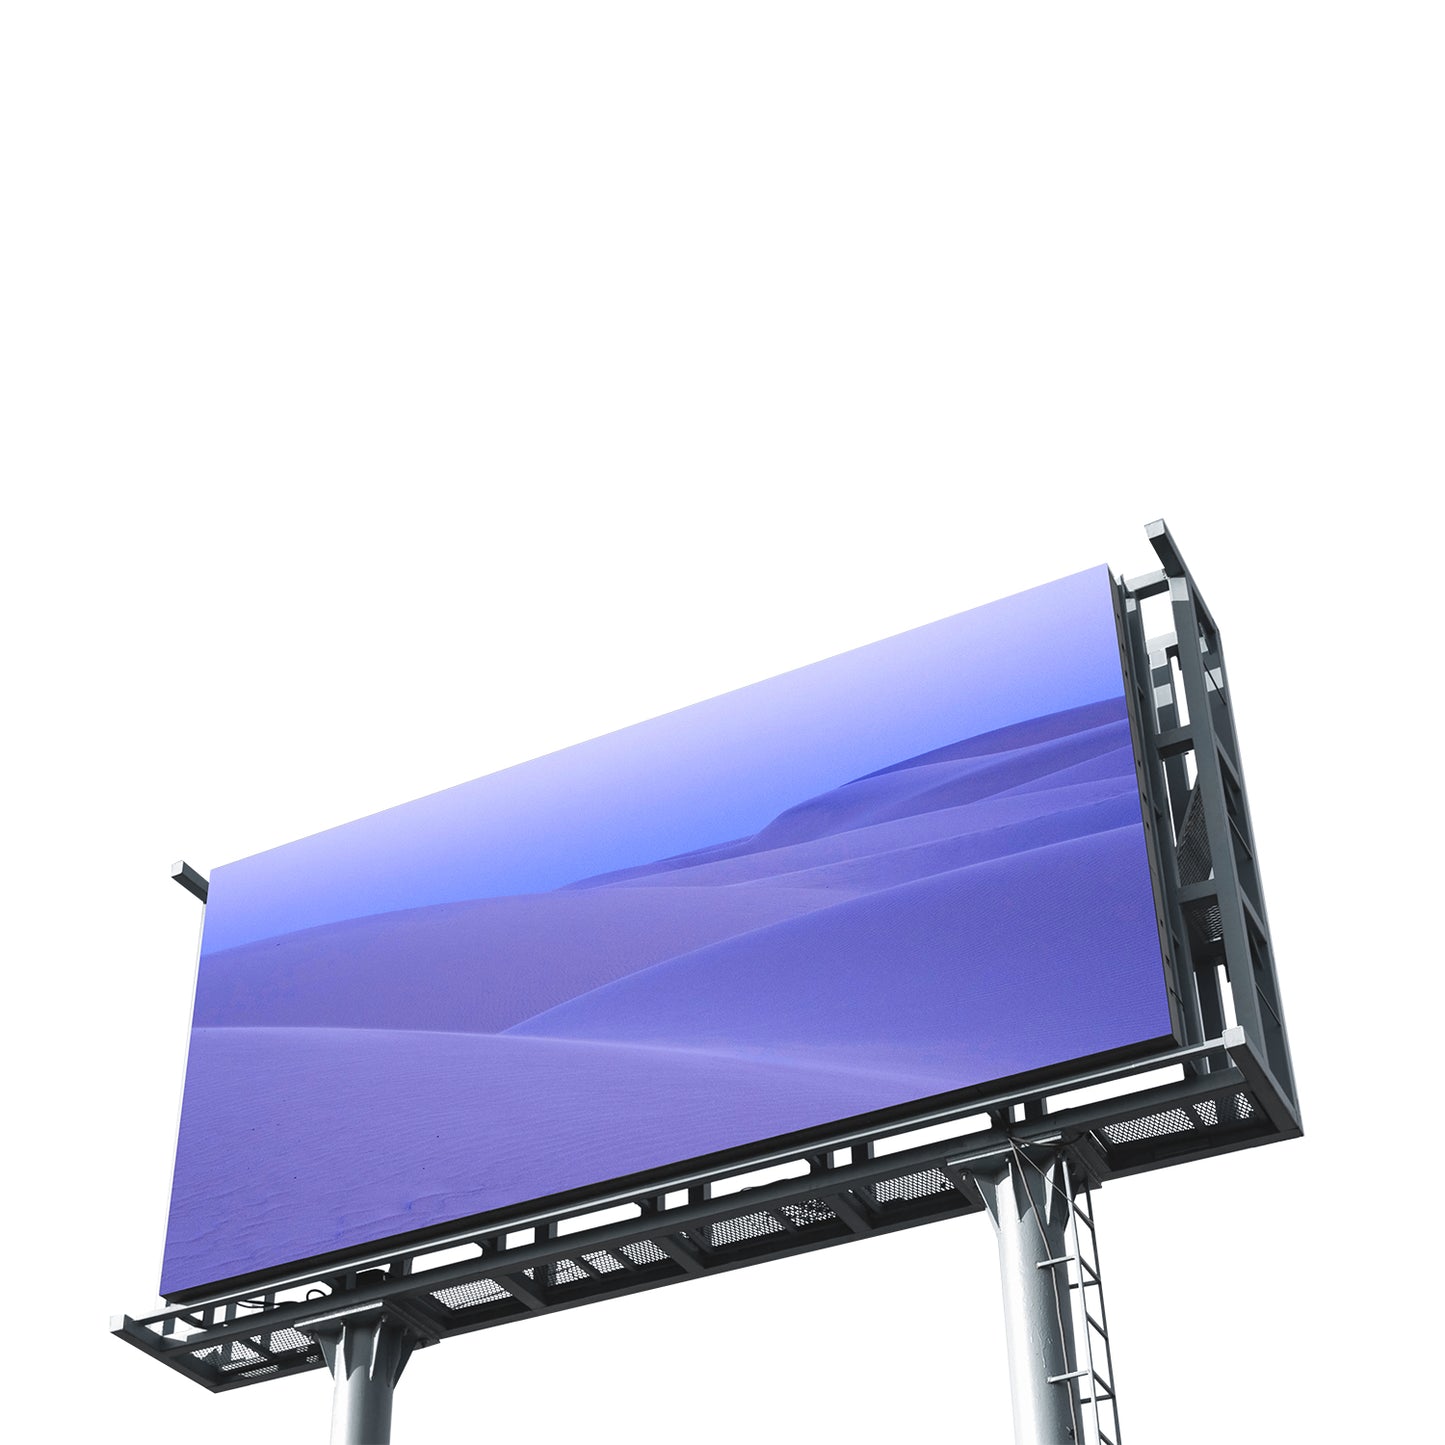 A2 outdoor small pixel pitch and high brightness billboard